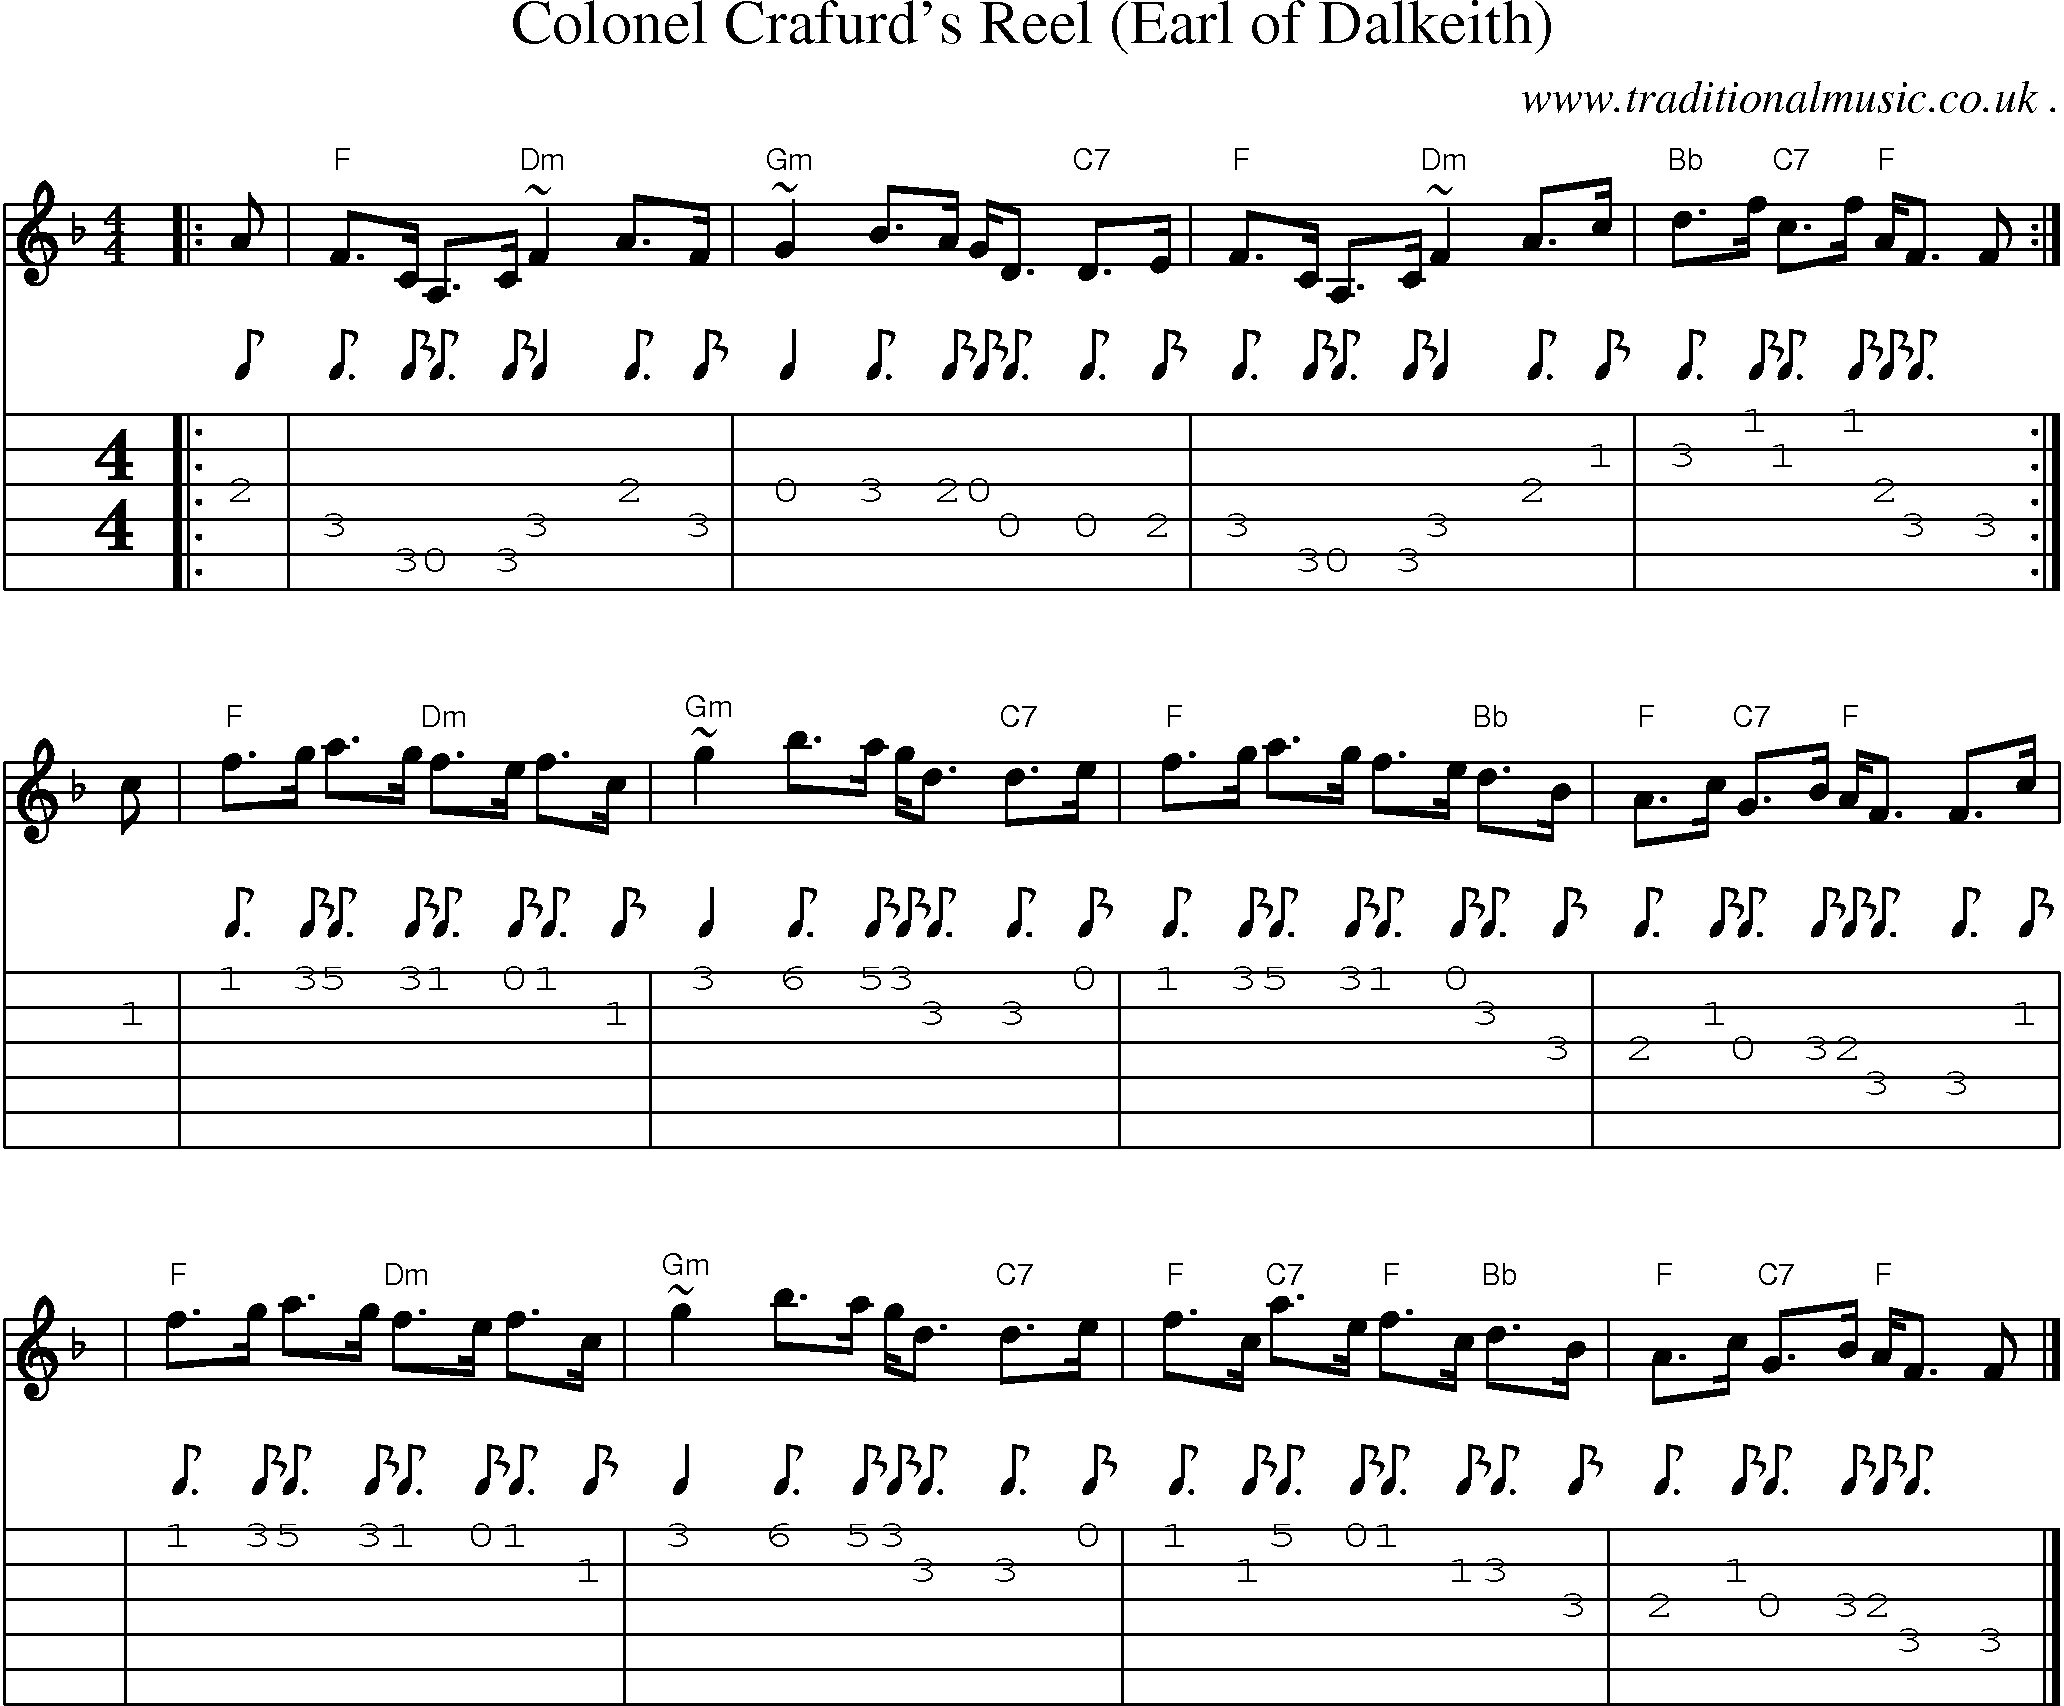 Sheet-music  score, Chords and Guitar Tabs for Colonel Crafurds Reel Earl Of Dalkeith